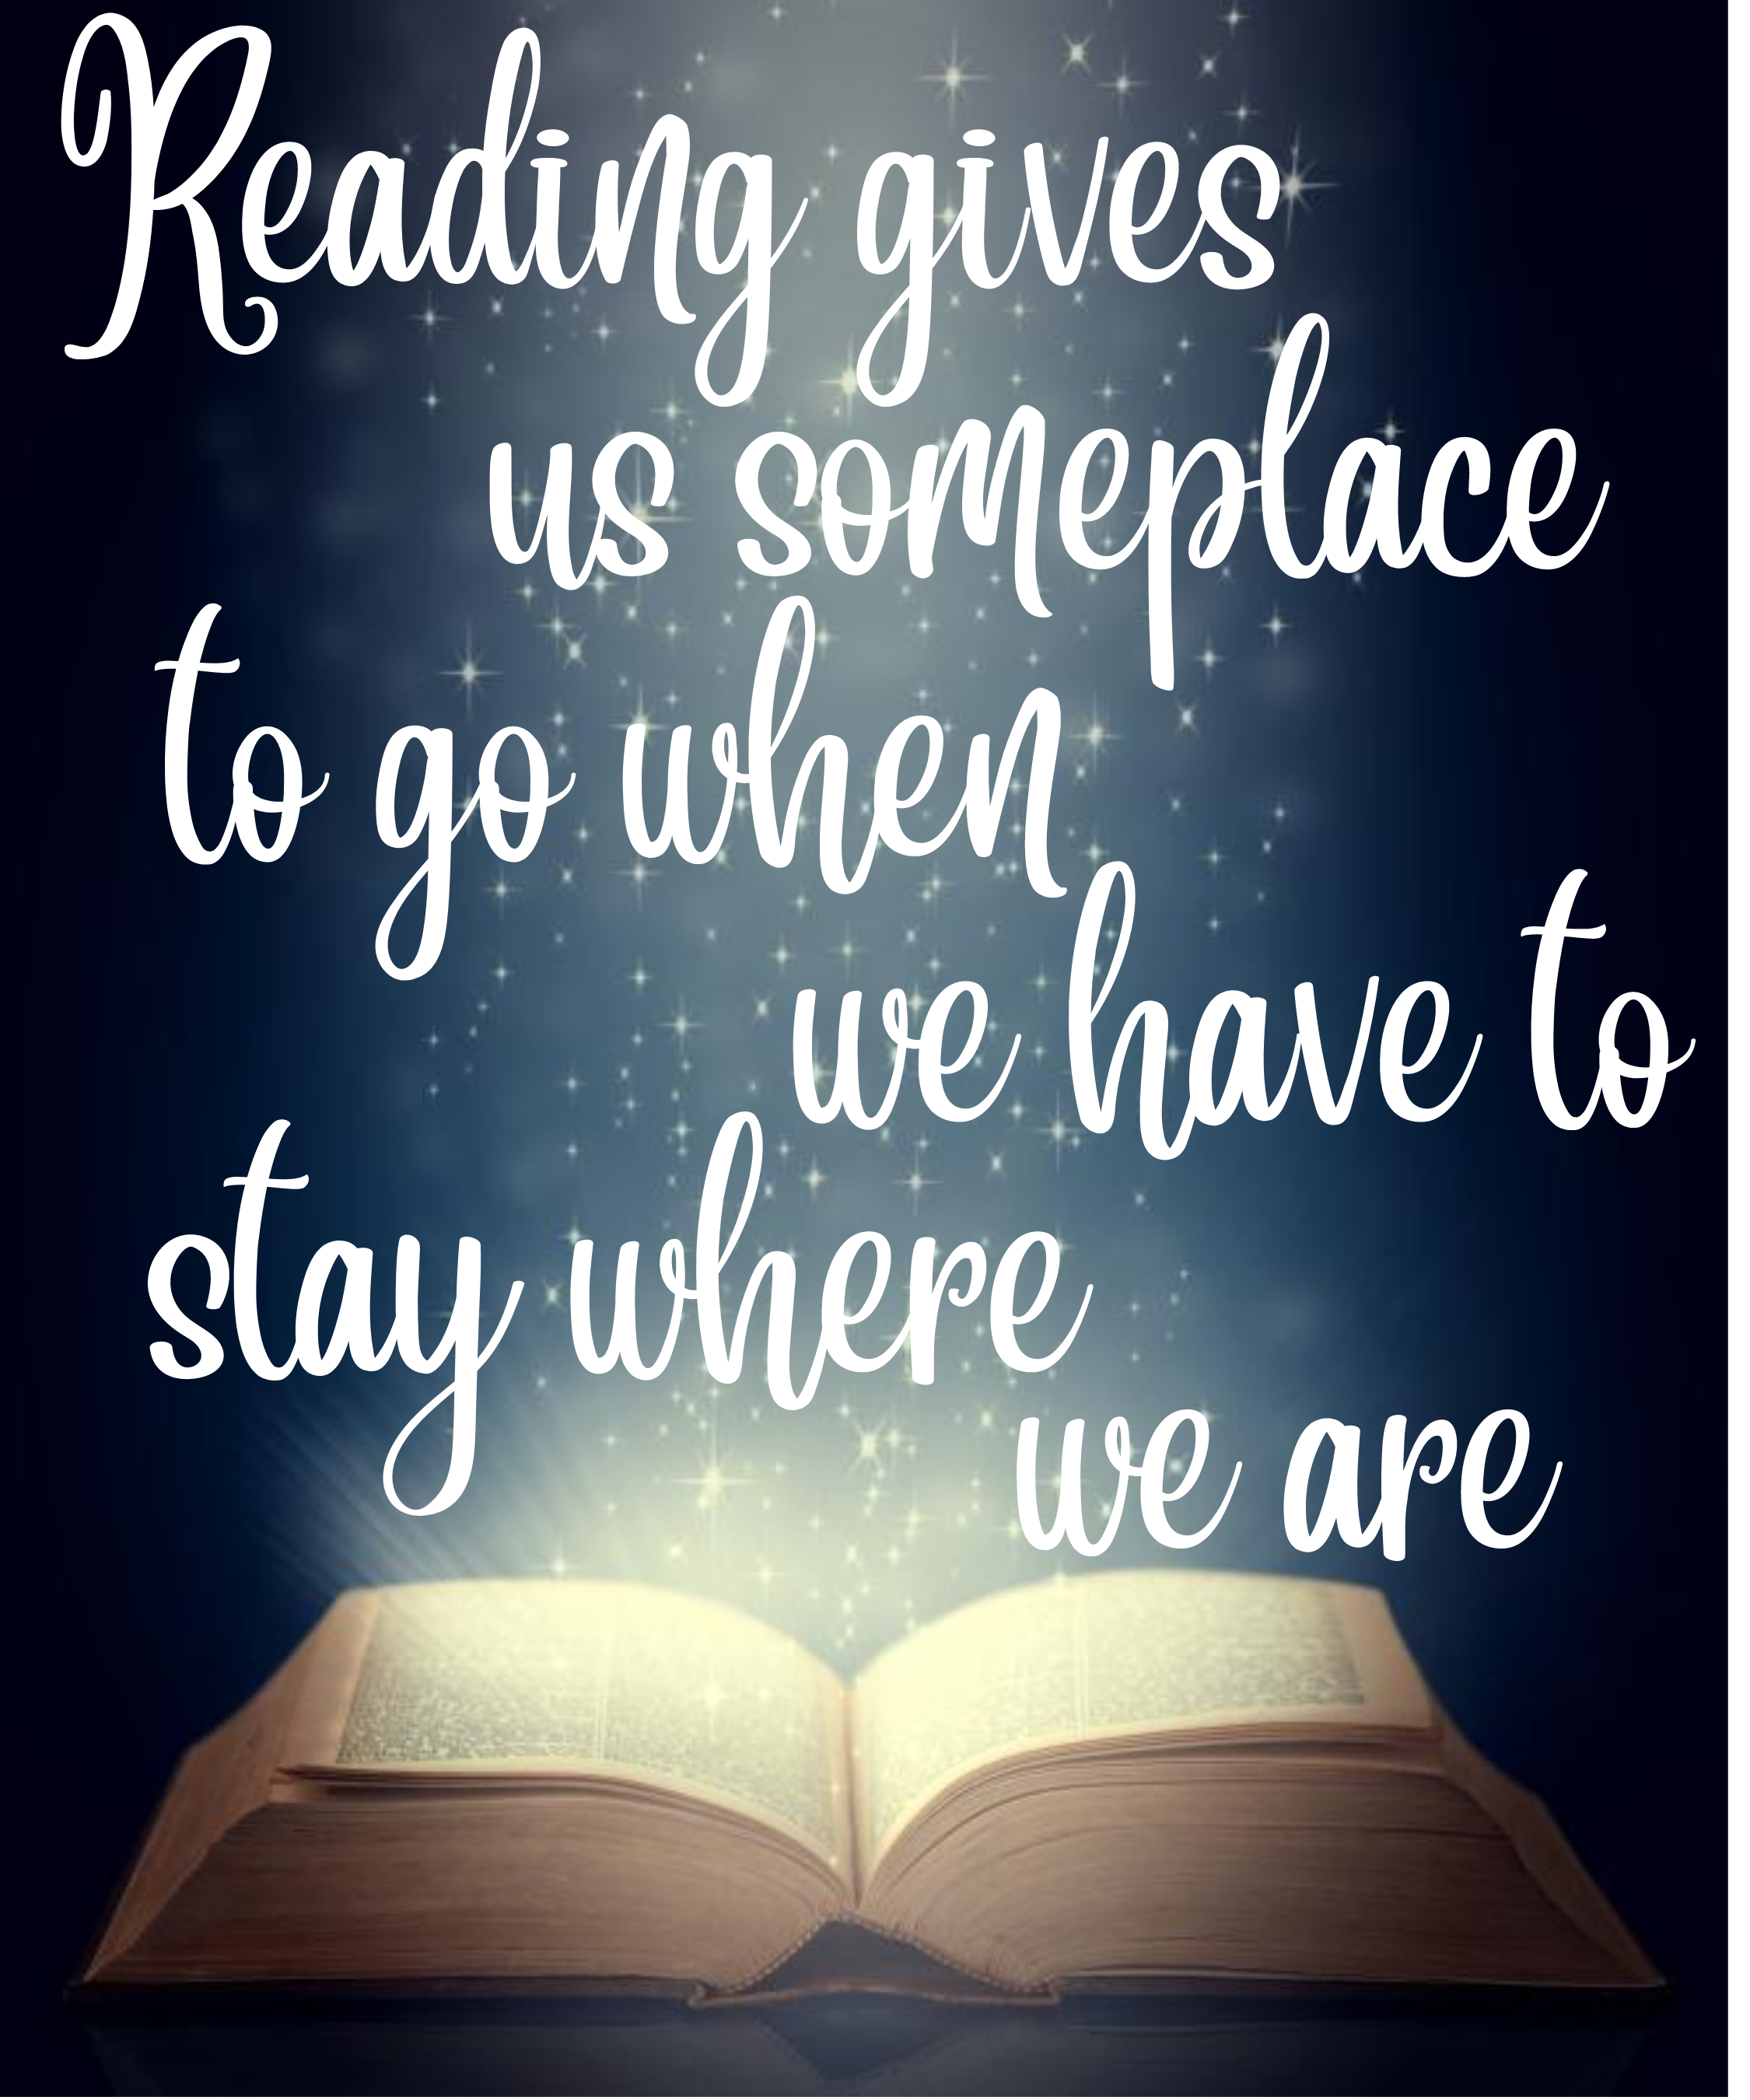 Reading is an Adventure